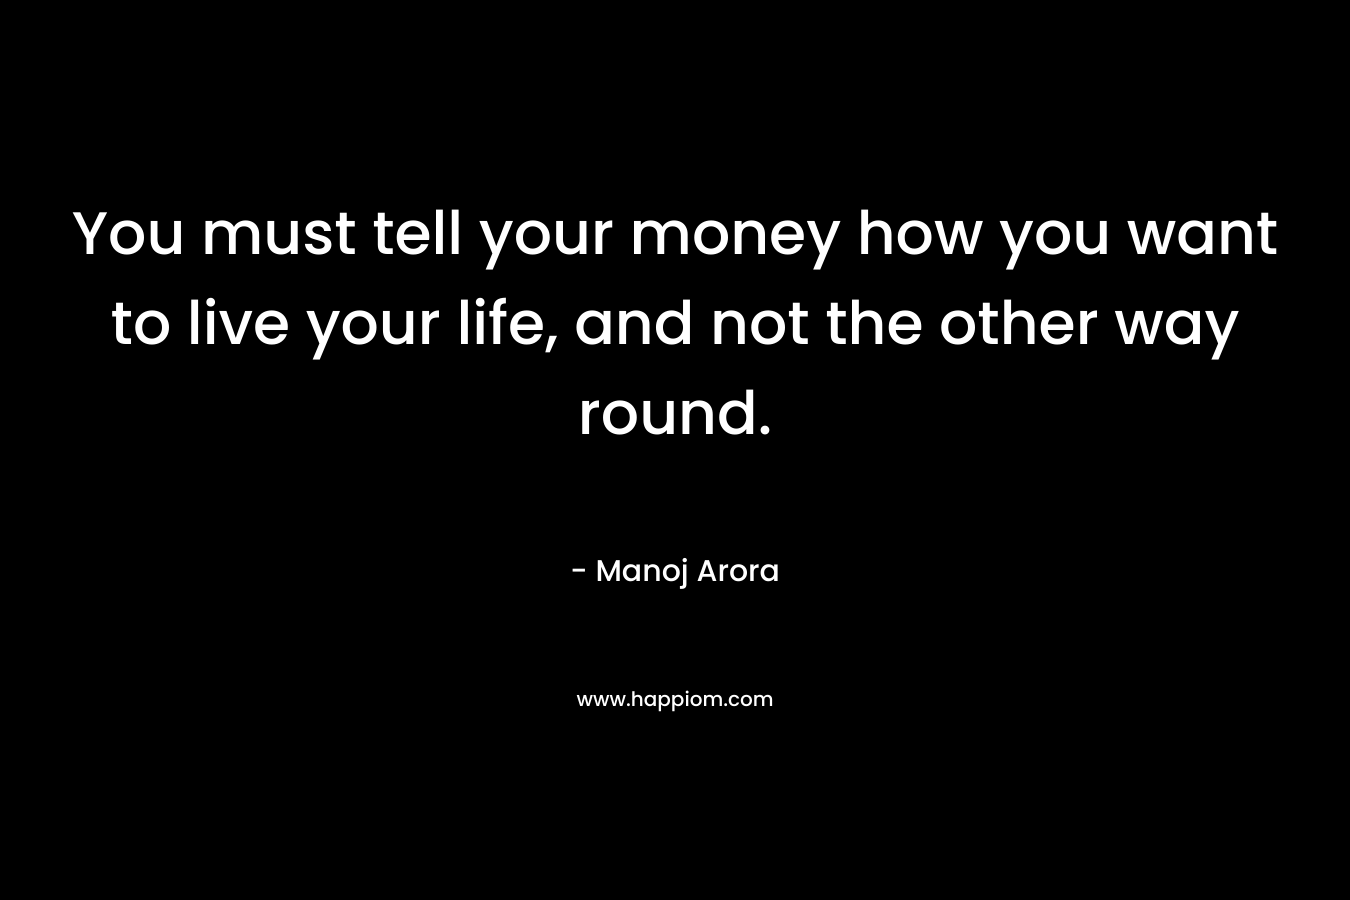 You must tell your money how you want to live your life, and not the other way round.